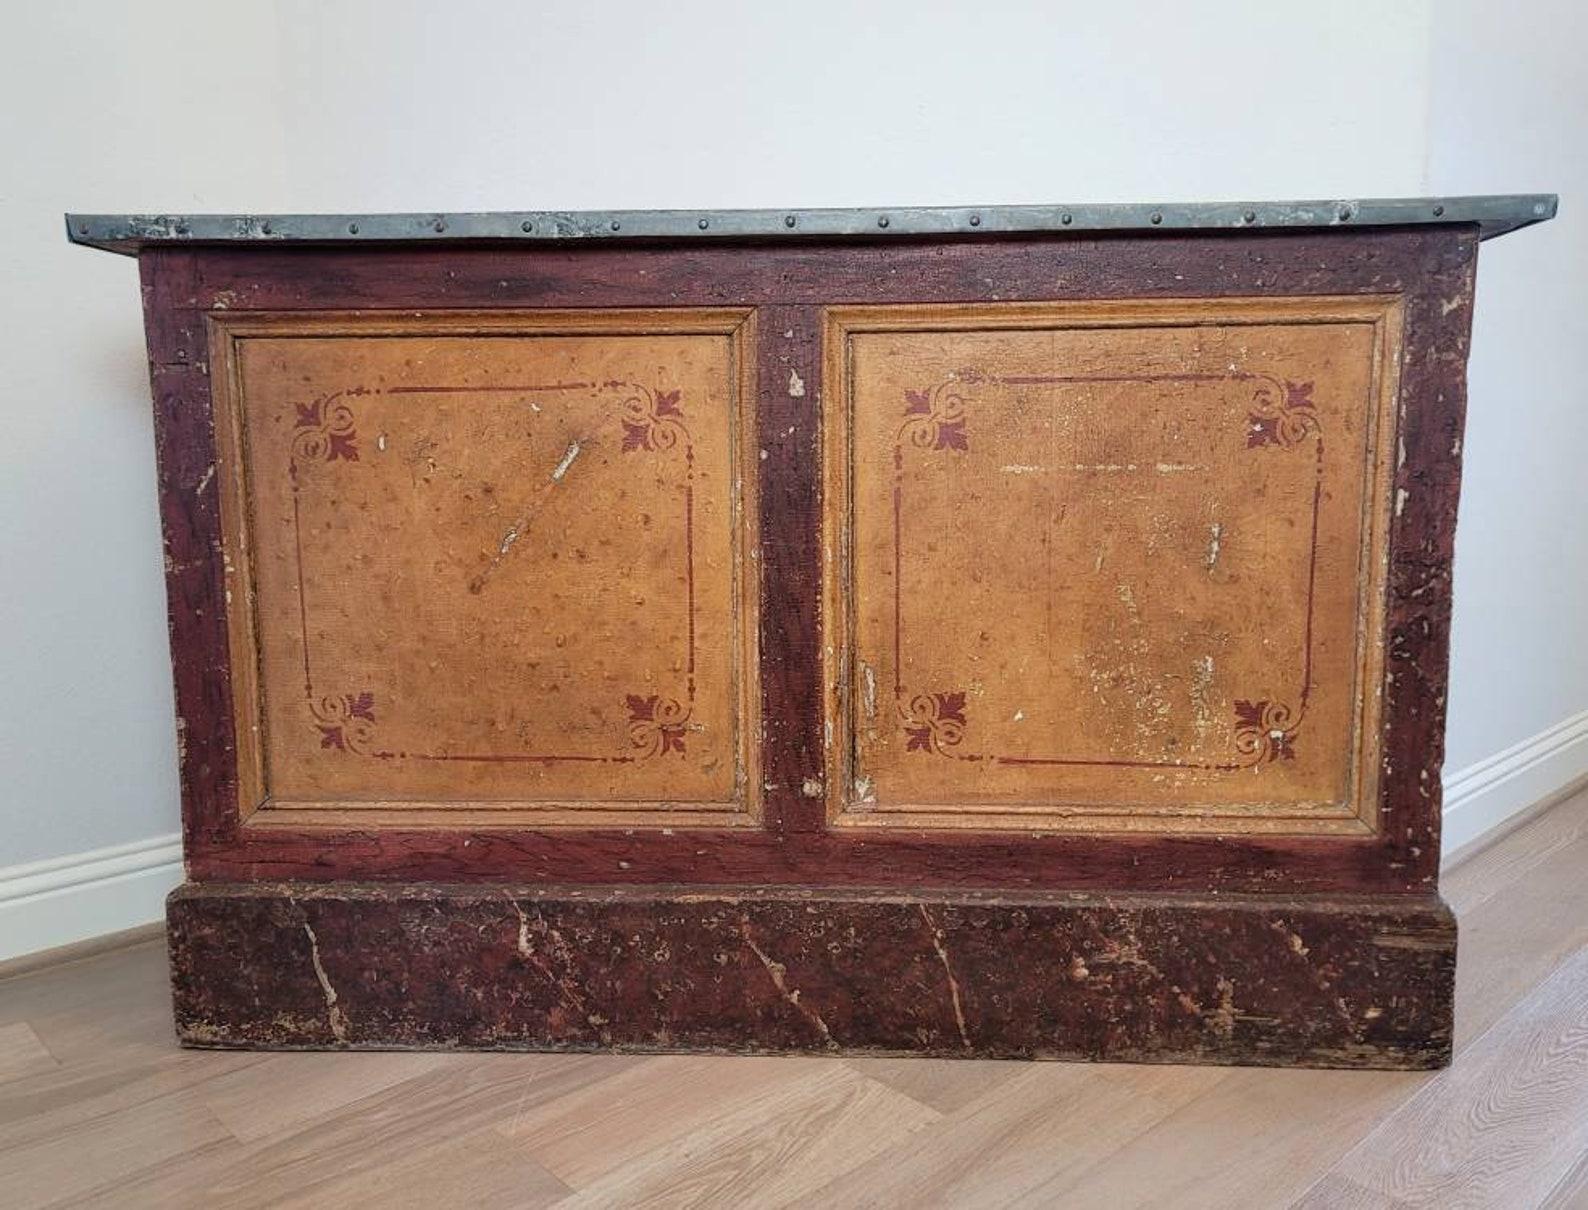 A rare, one-of-a-kind French industrial 19th century general store counter. 

Finished on all sides, today this most distinctive work of art would make for an impressive kitchen island, boutique retail shop counter, home media console or dry bar,